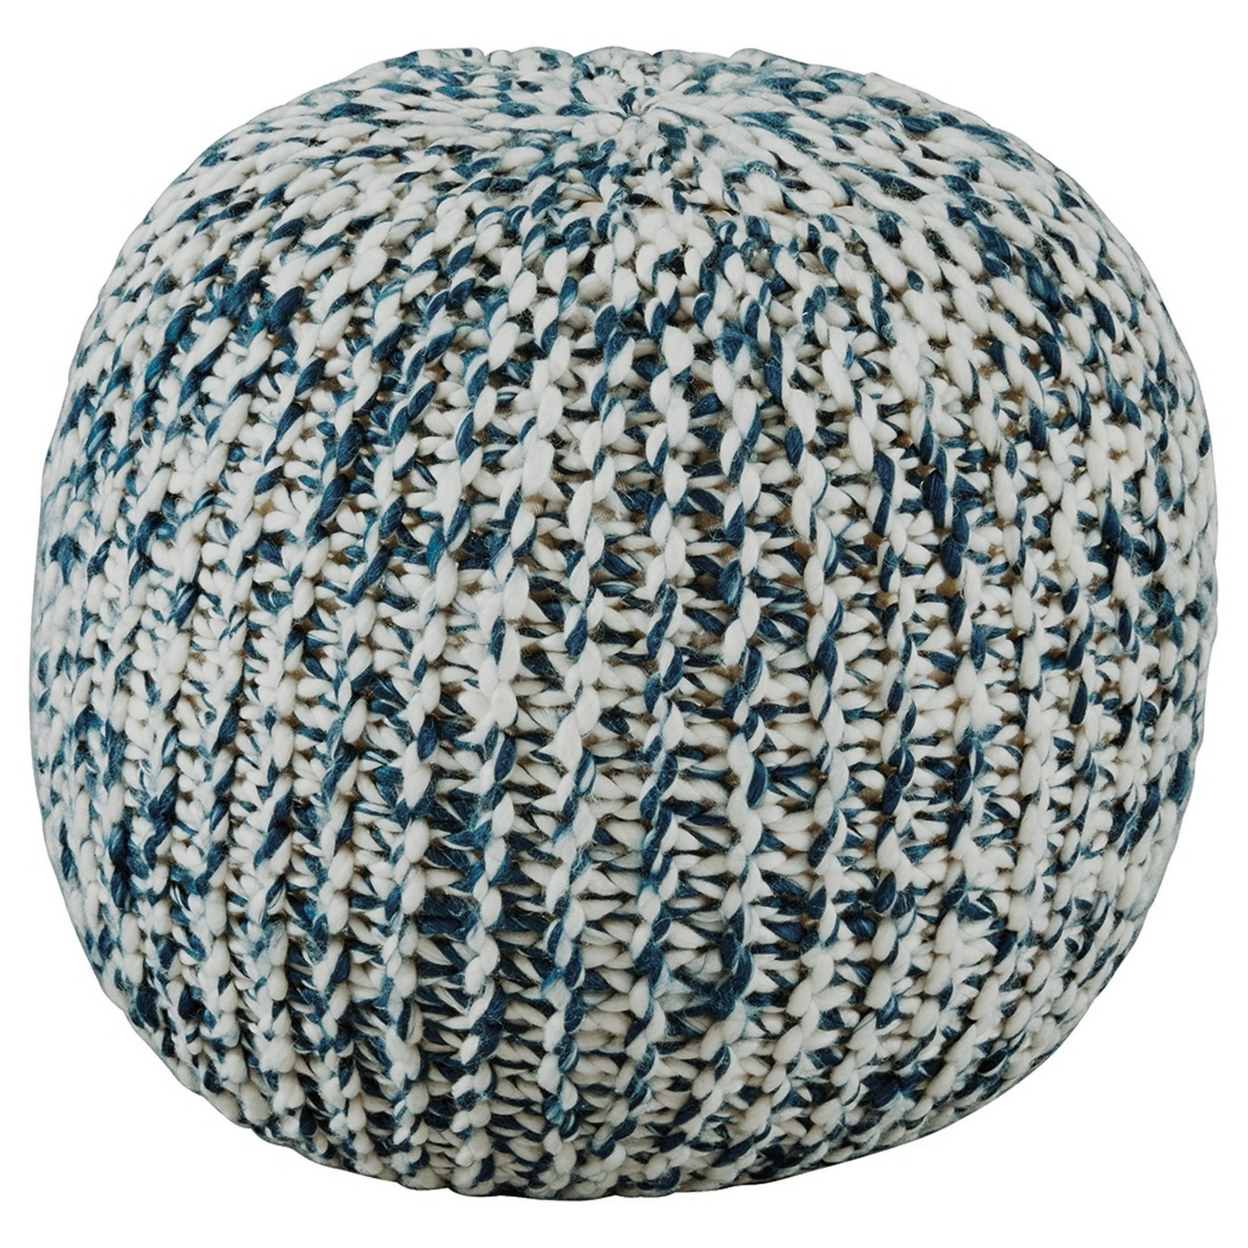 Round Pouf With Hand Knit Details, Blue And White- Saltoro Sherpi